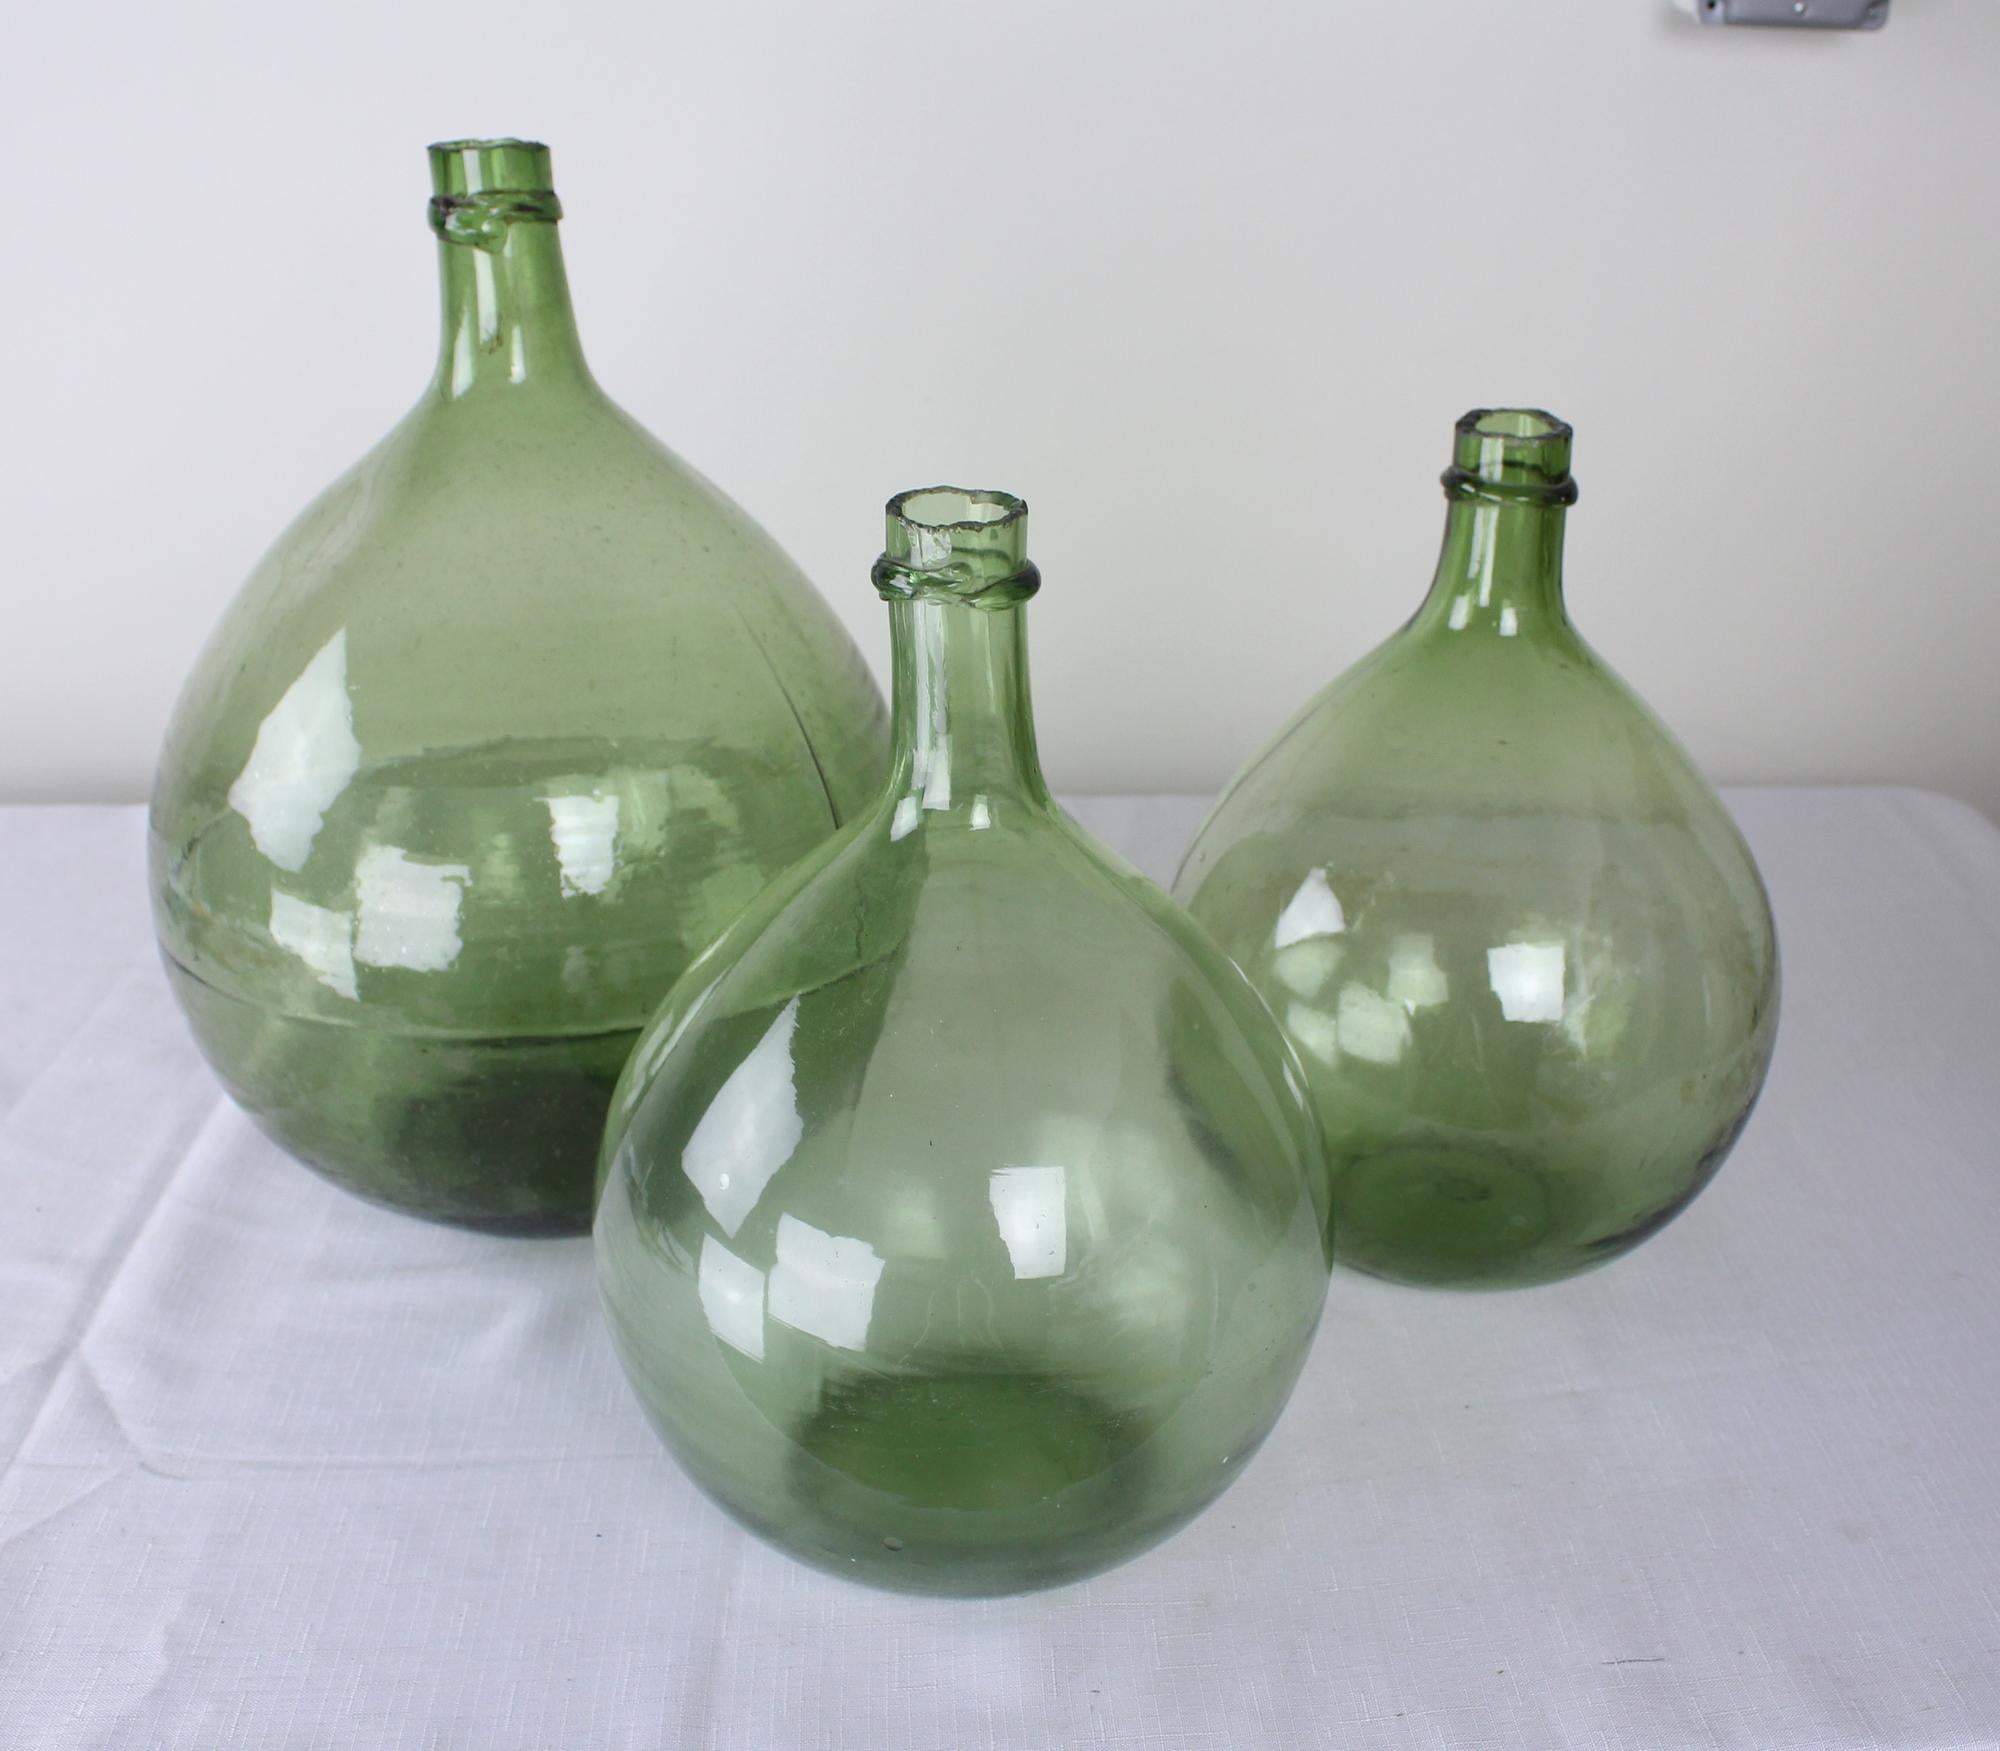 A collection of three olive colored glass demijohn bottles, used from the late 17th century through the 19th century to carry wine and spirits. Hand blown, each has their own unique characteristics, from the tilt of the gooseneck to the trapped air